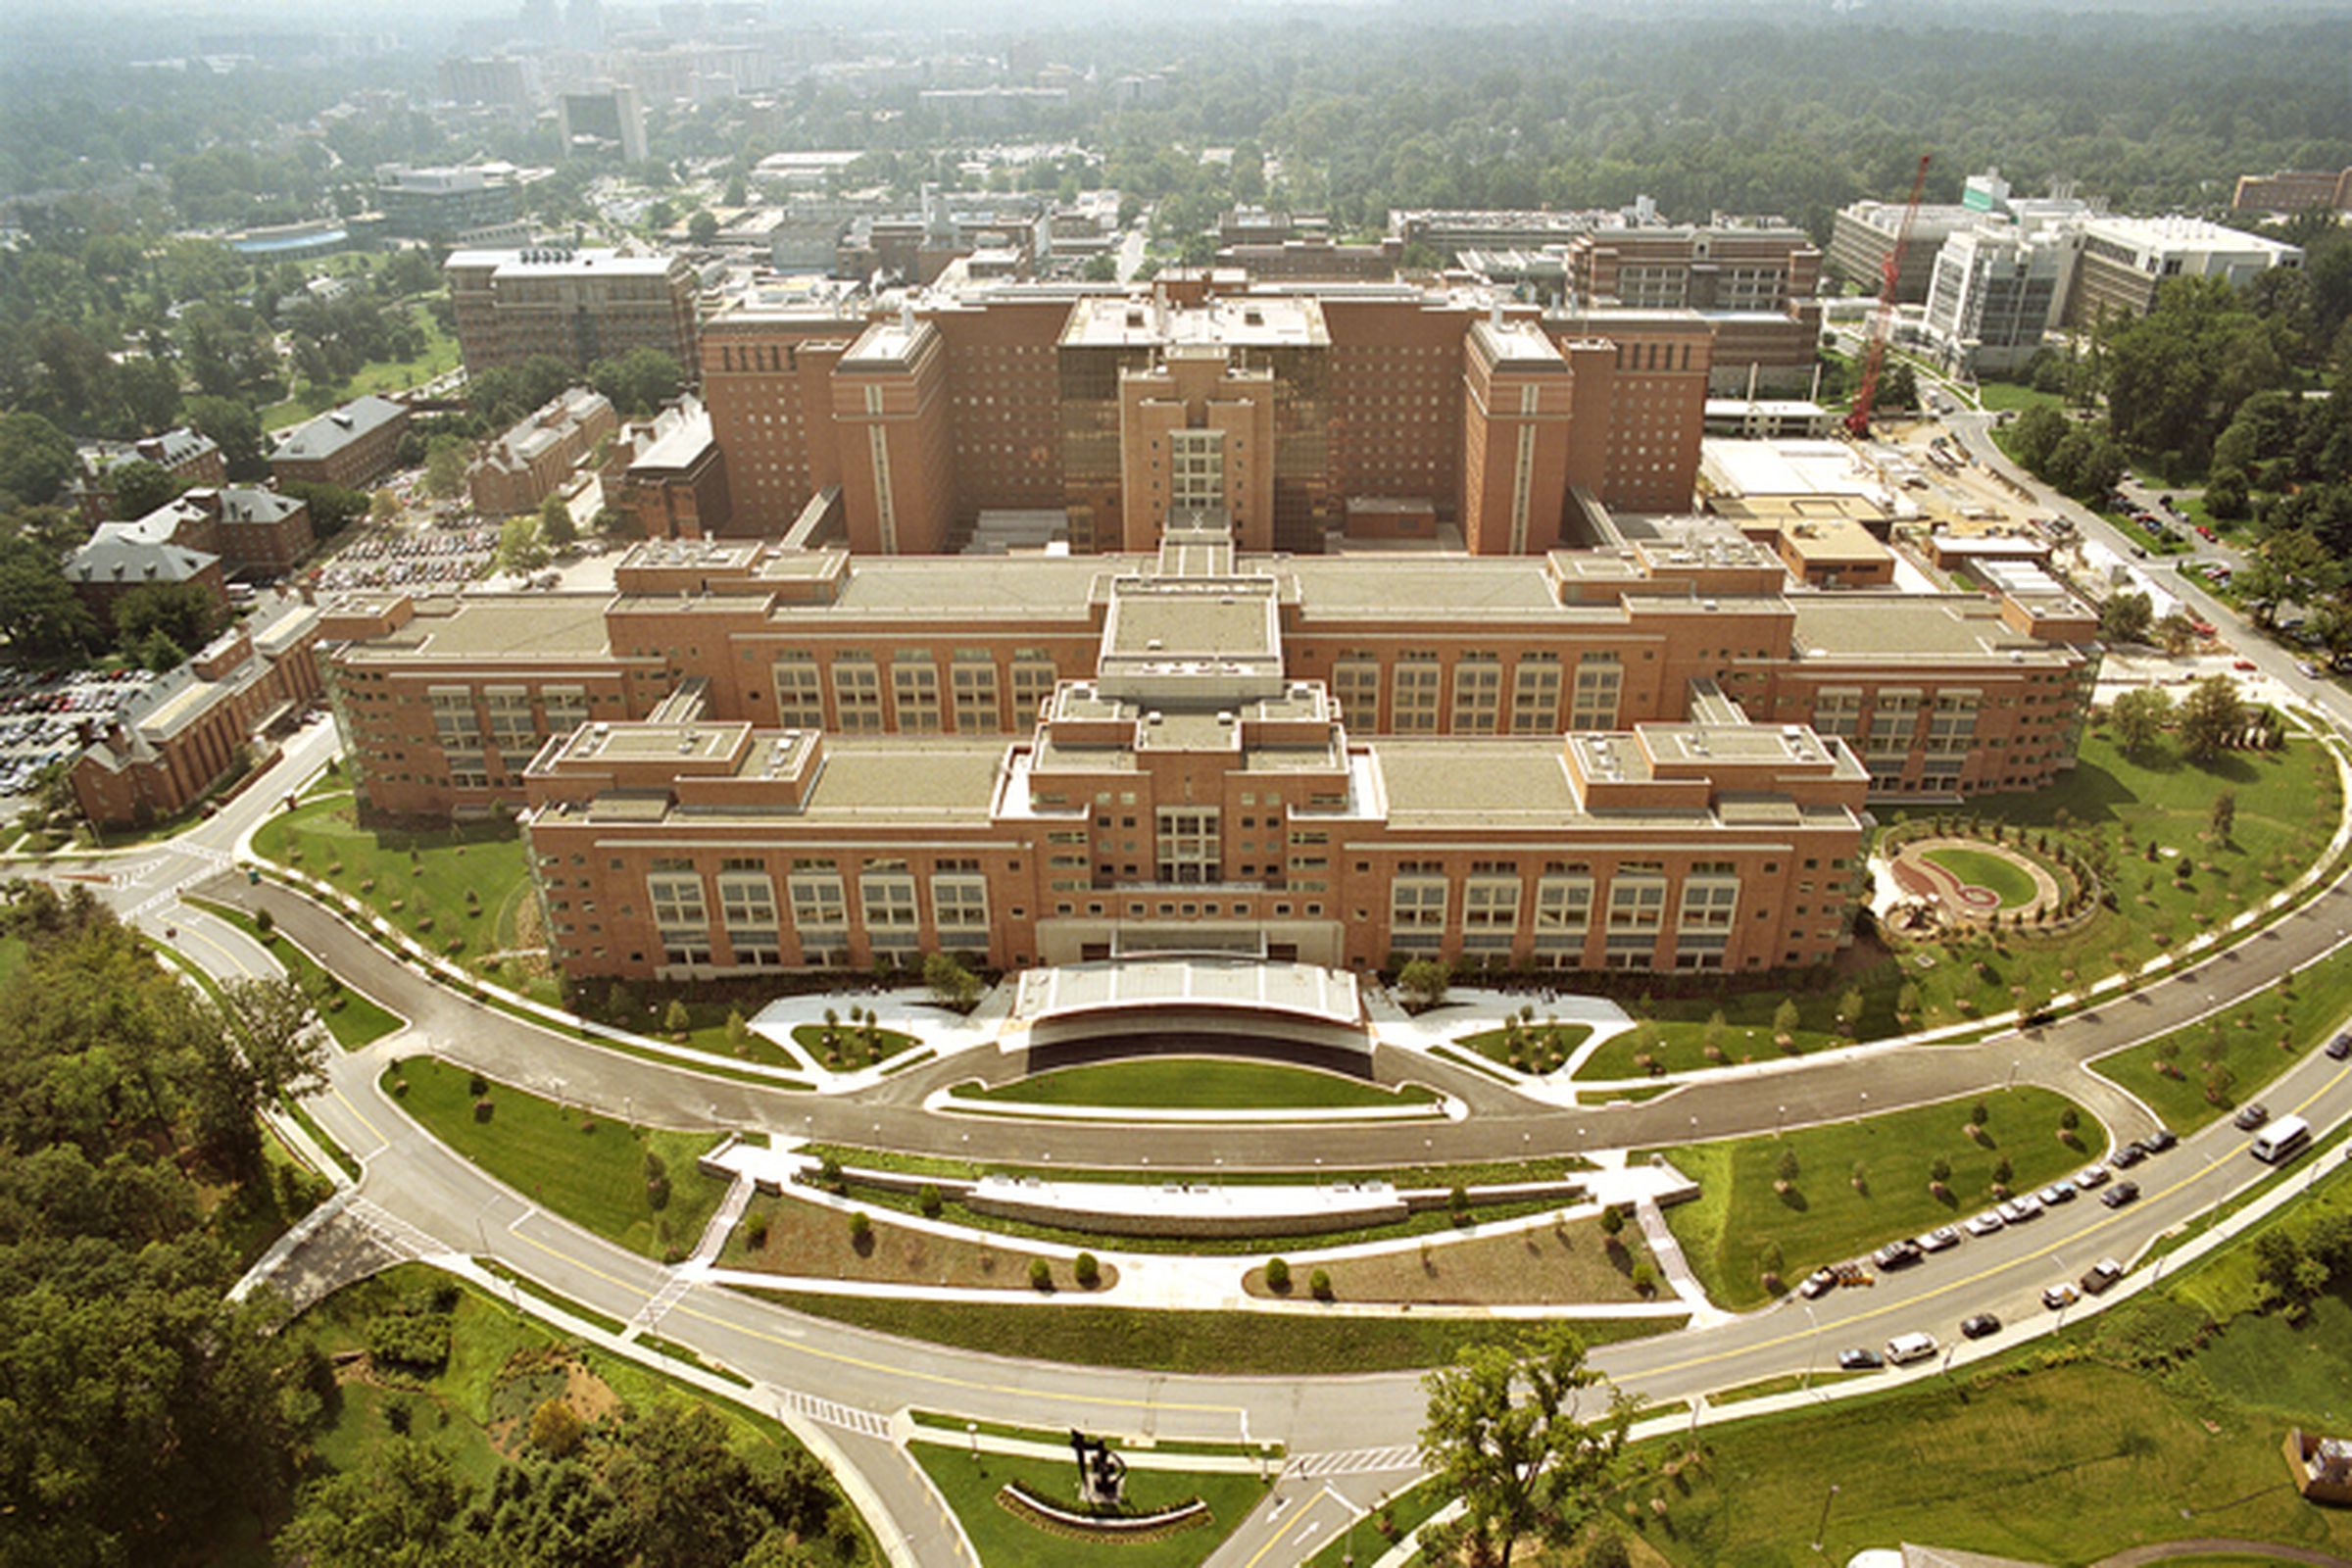 Mark O. Hatfield Clinical Research Center on the National Institutes of Health Bethesda, Maryland campus